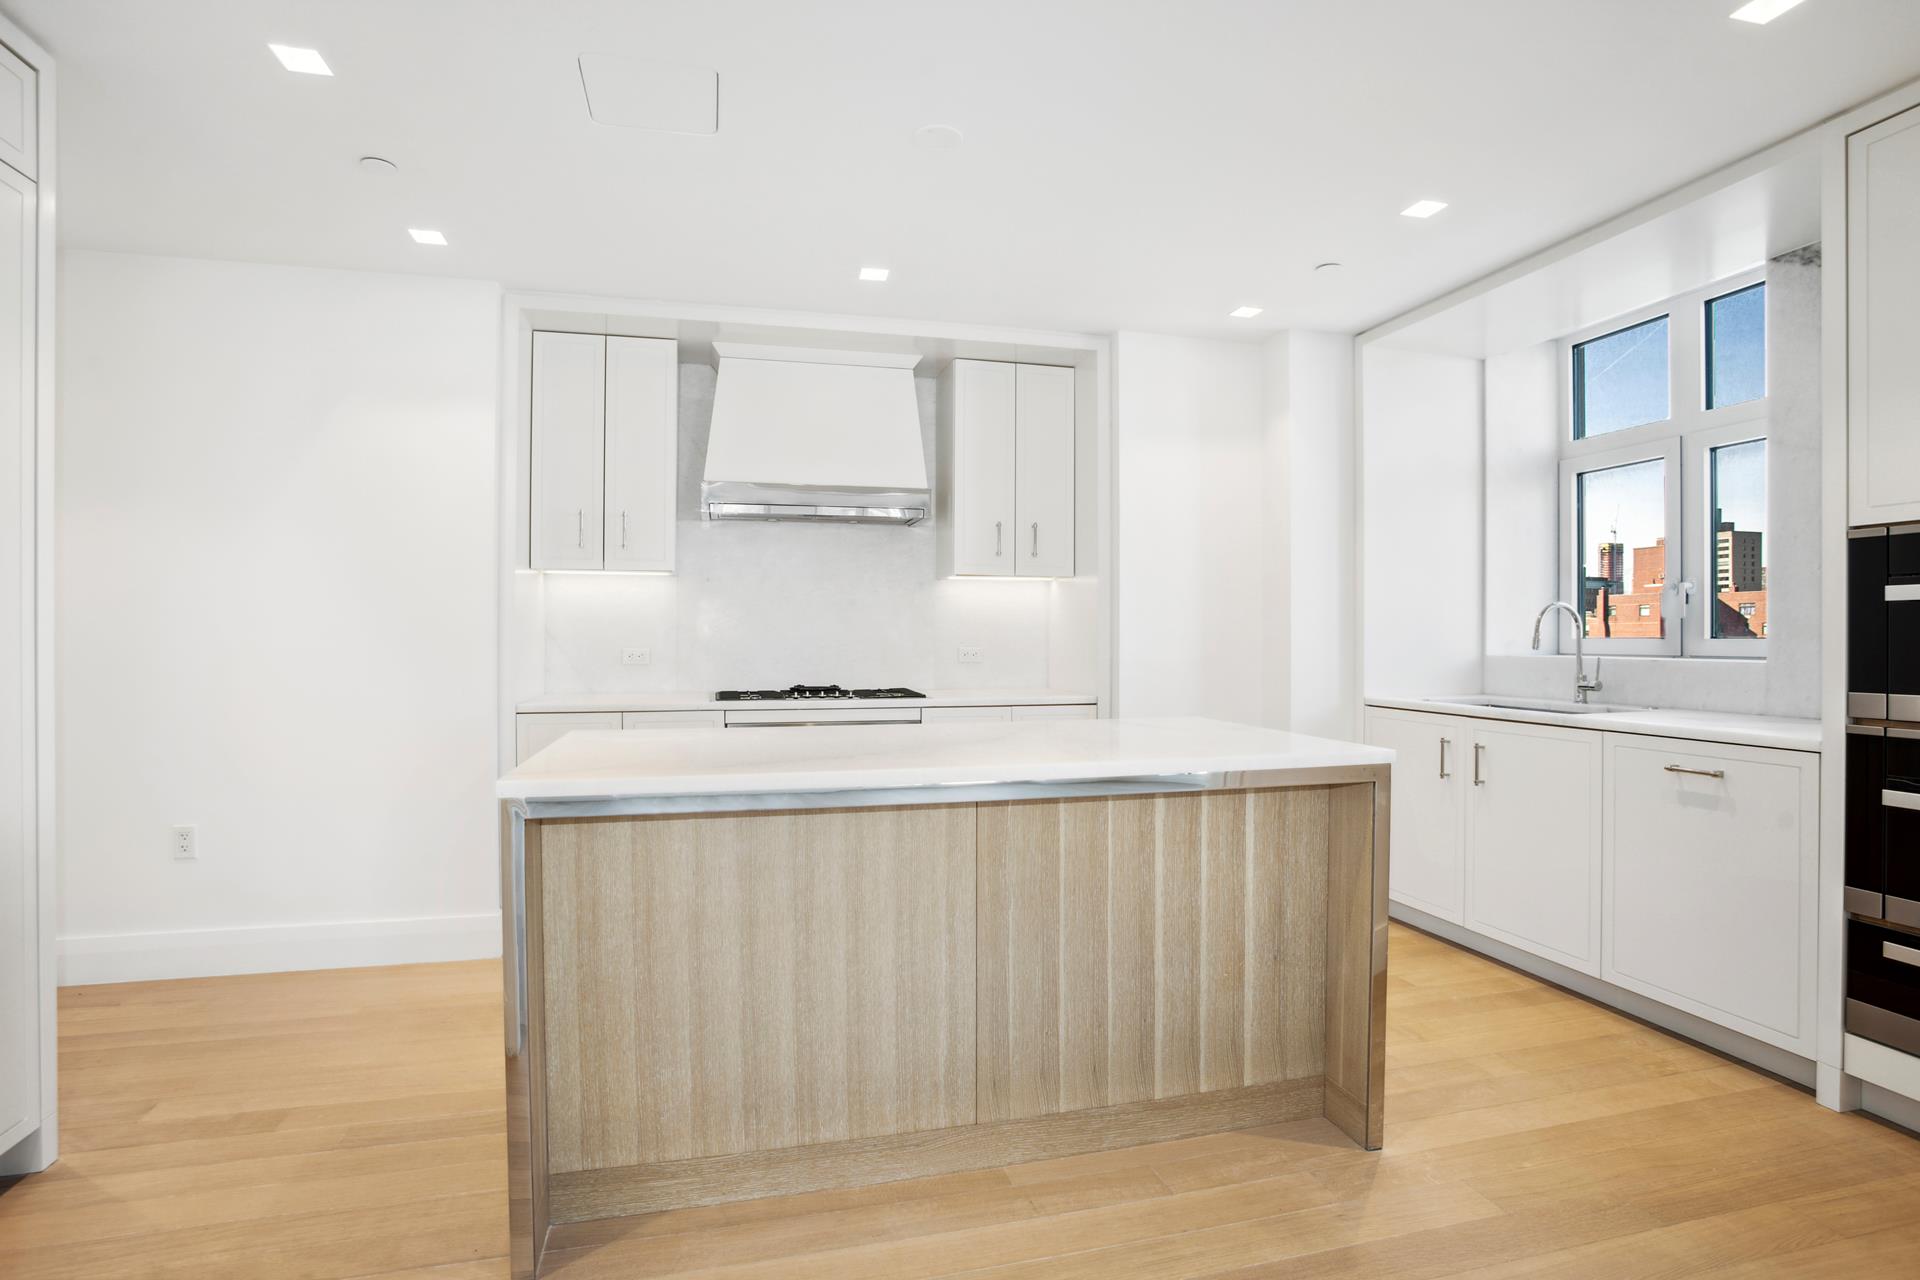 200 East 83rd Street 15B, Yorkville, Upper East Side, NYC - 3 Bedrooms  
3.5 Bathrooms  
5 Rooms - 